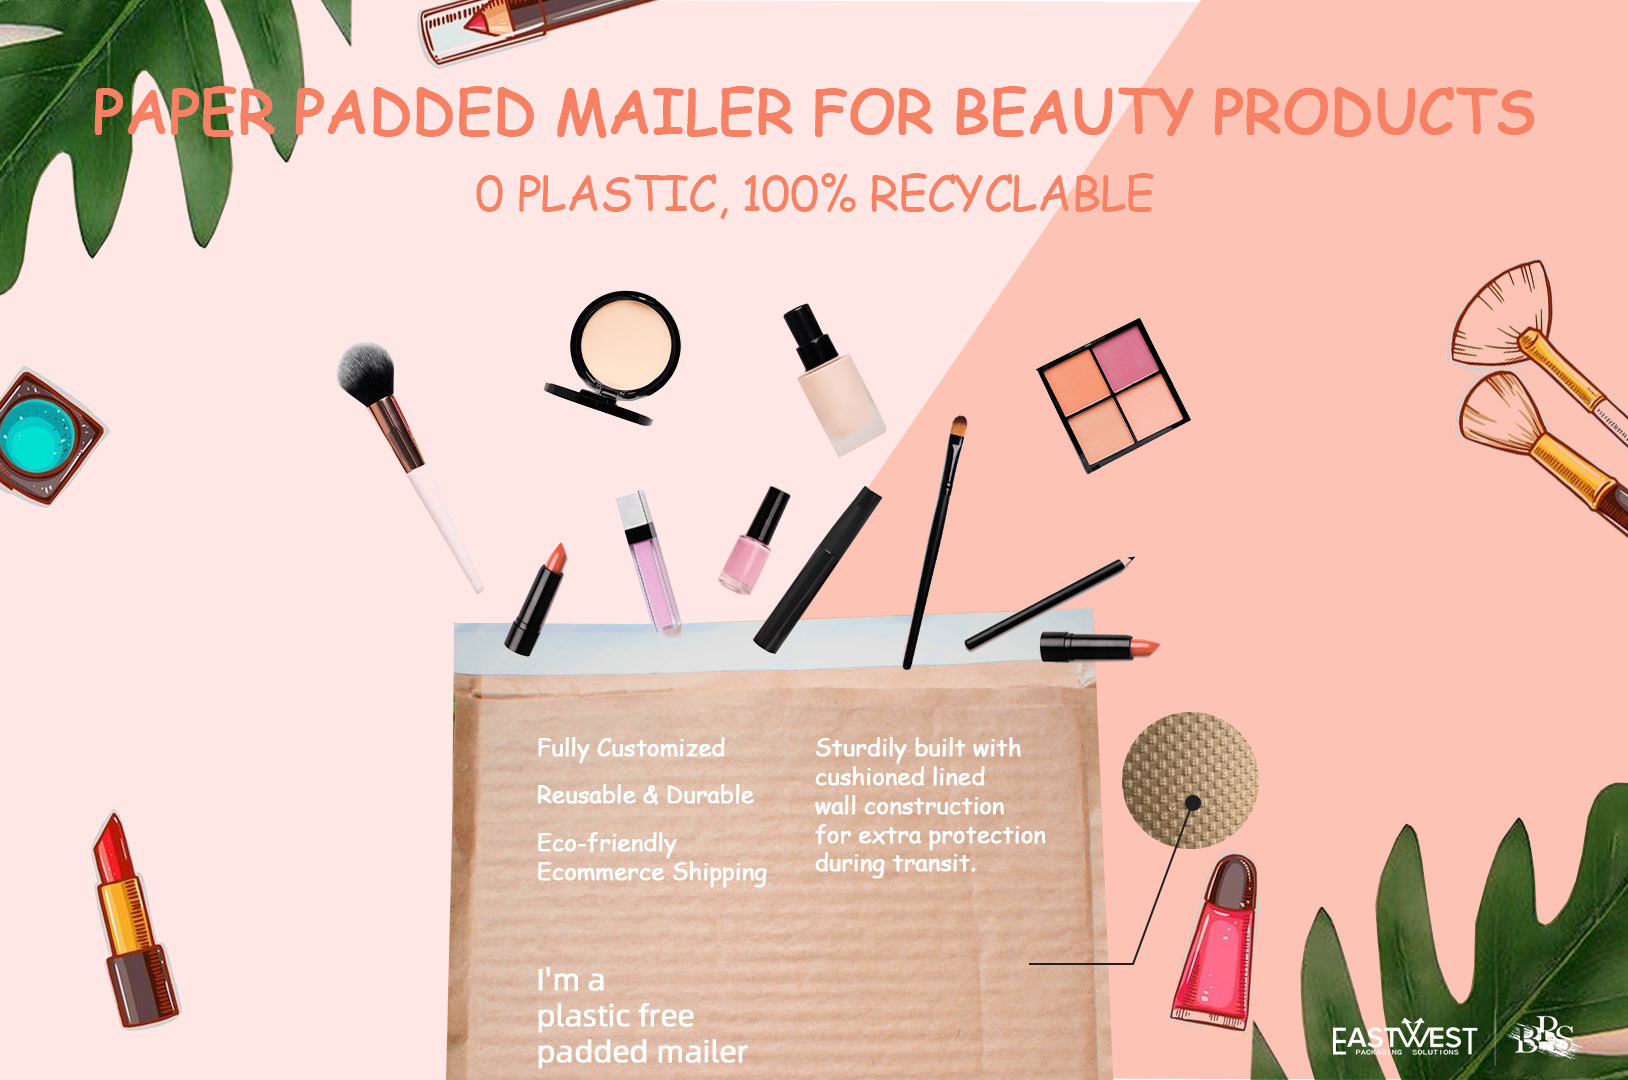 Ship Your Beauty Products in Paper Padded Mailers that Won’t End Up in Landfills